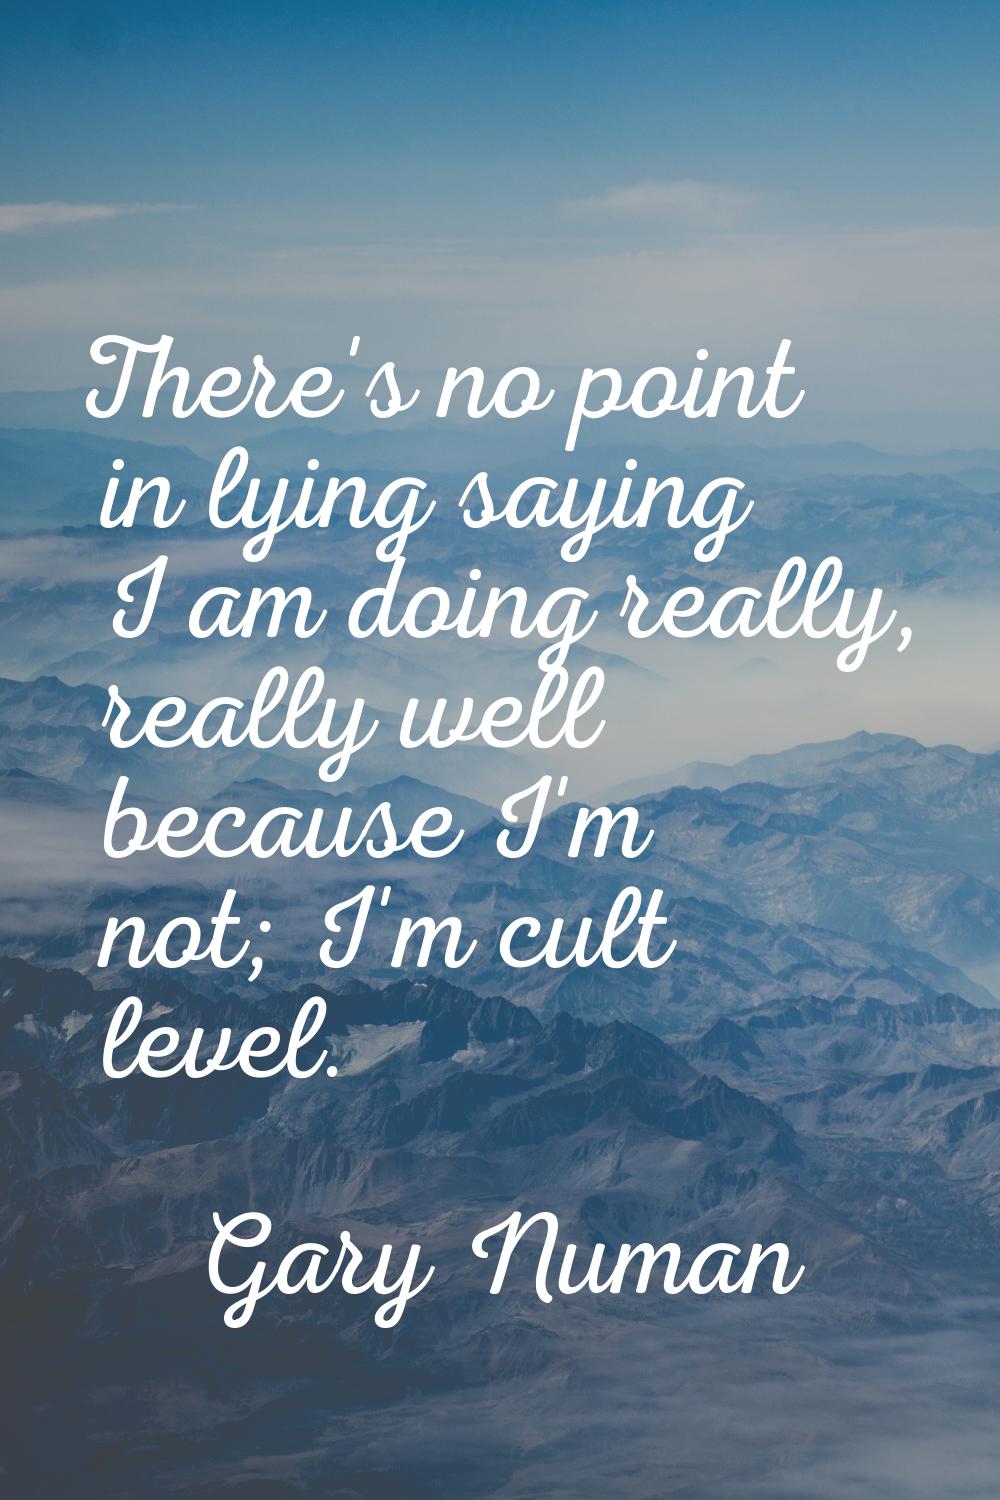 There's no point in lying saying I am doing really, really well because I'm not; I'm cult level.